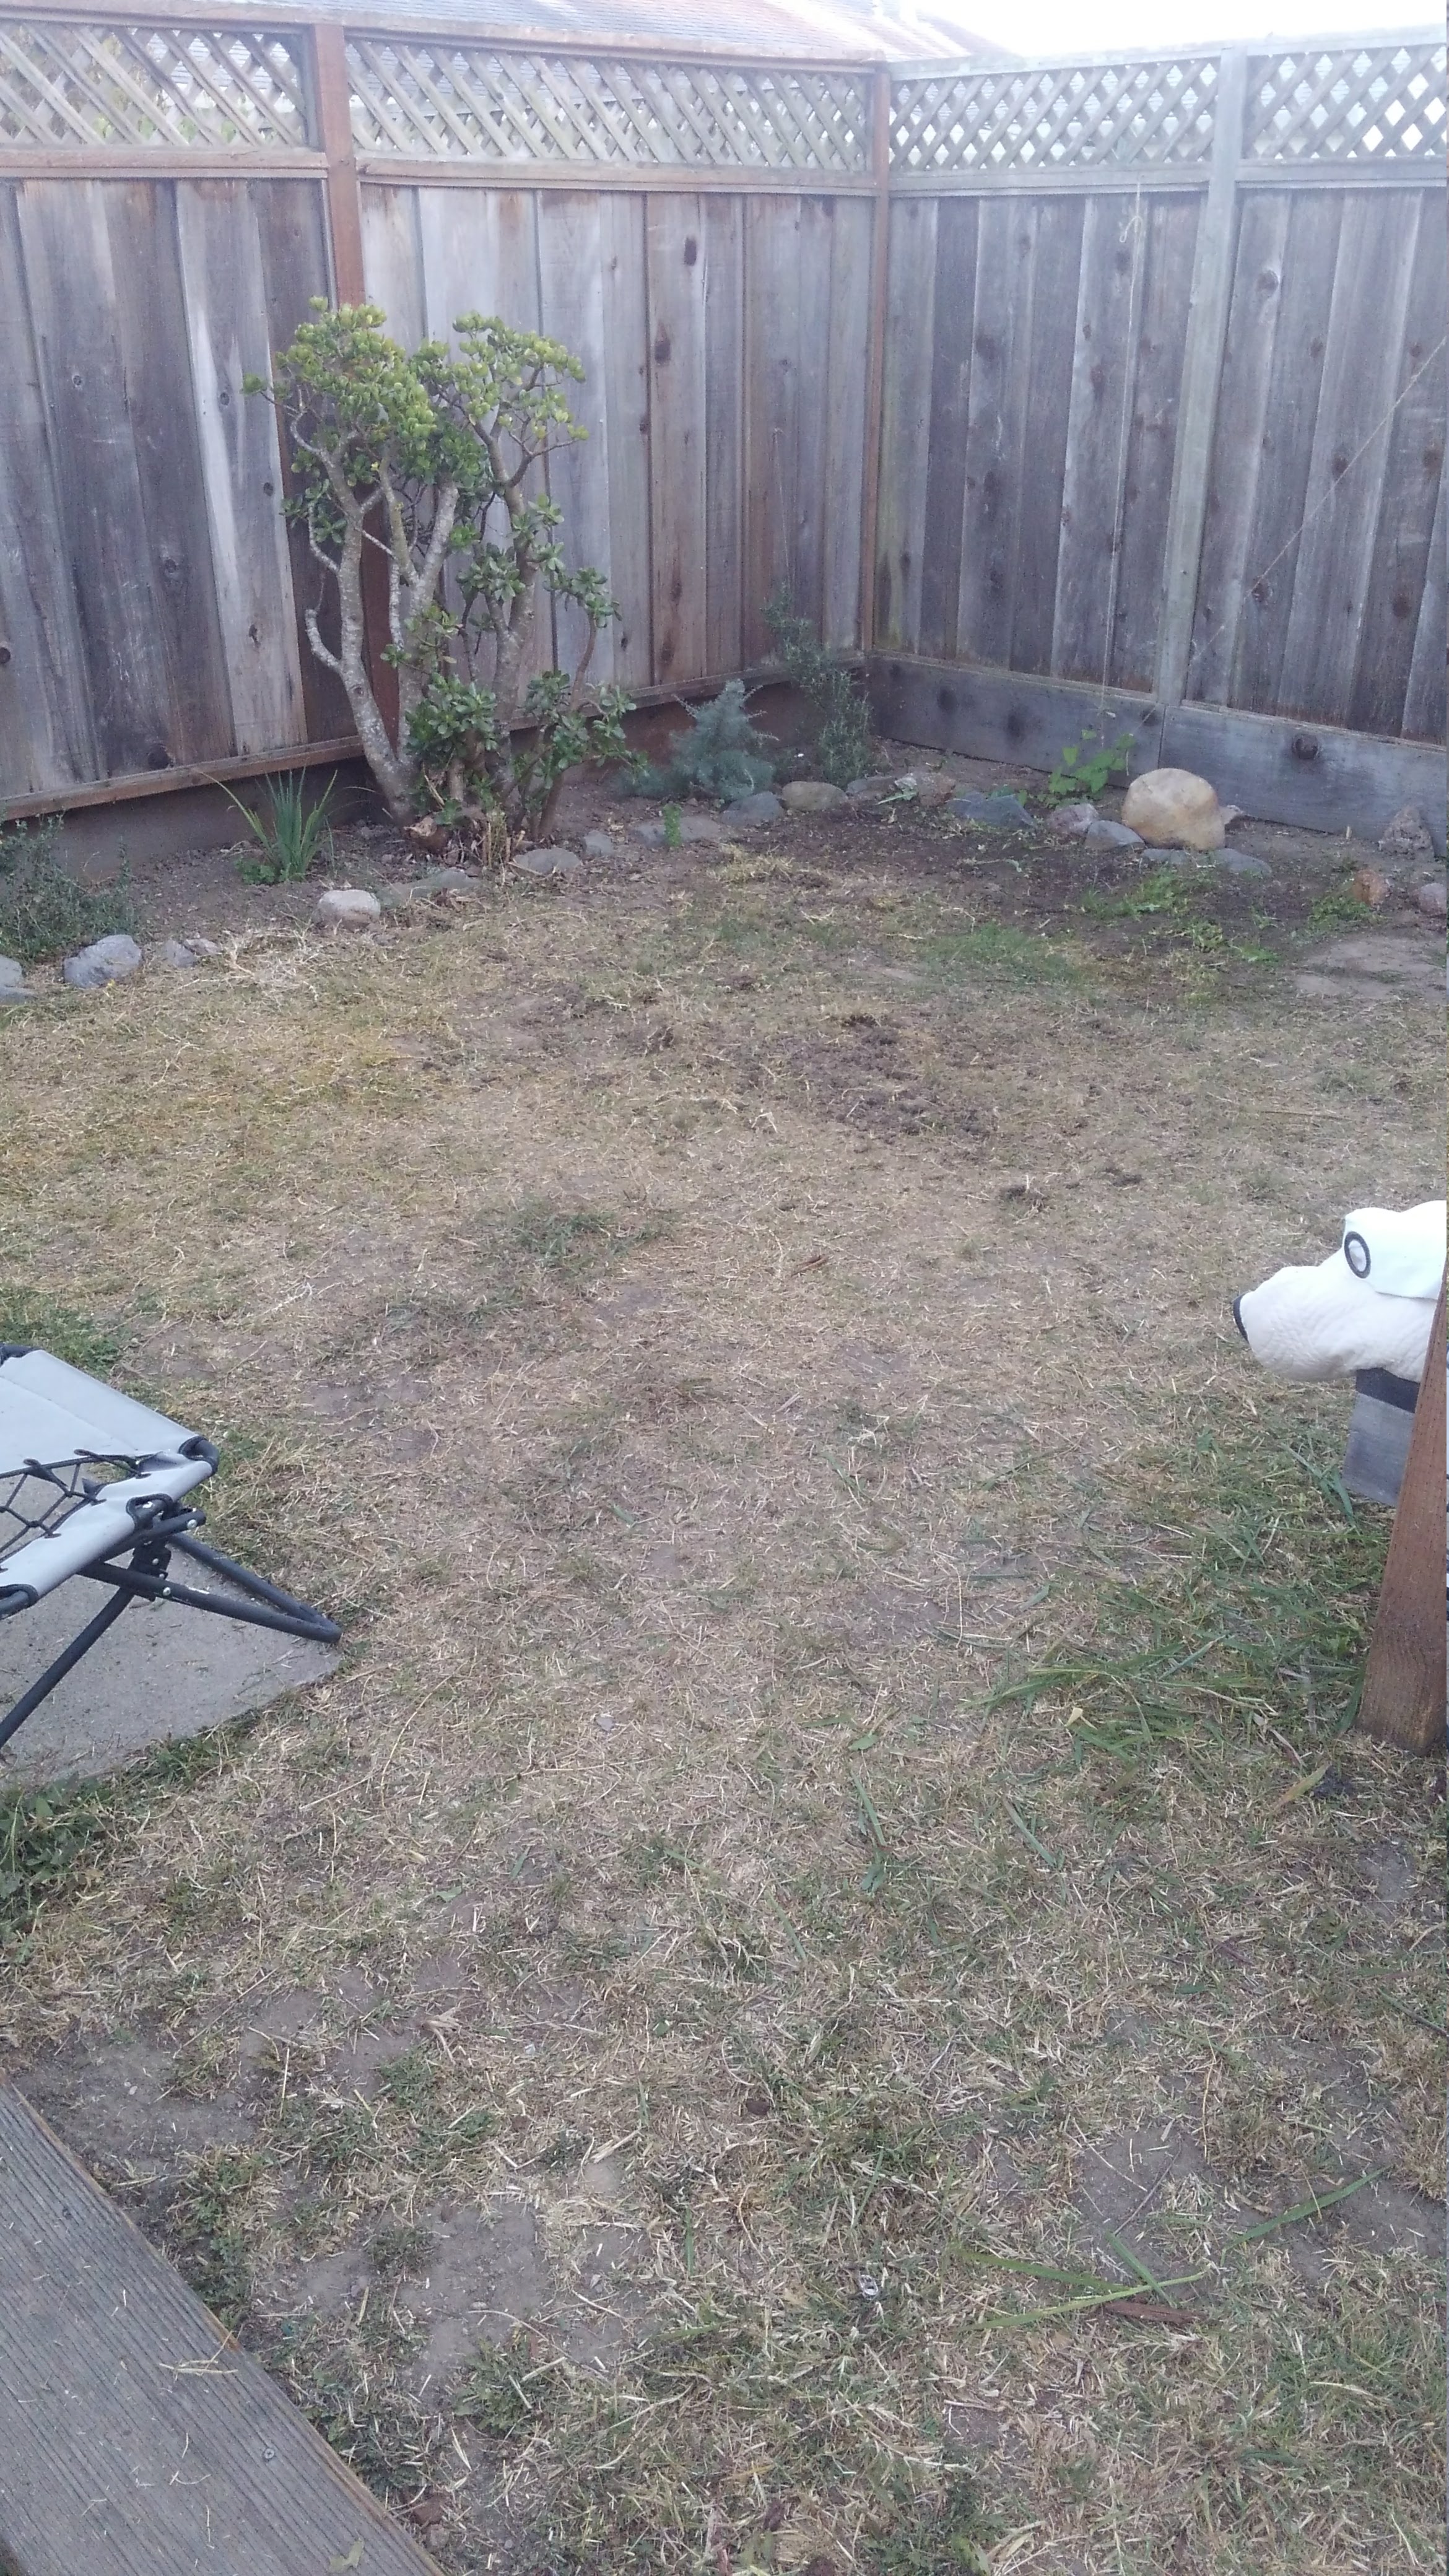 The stages of replacing the lawn